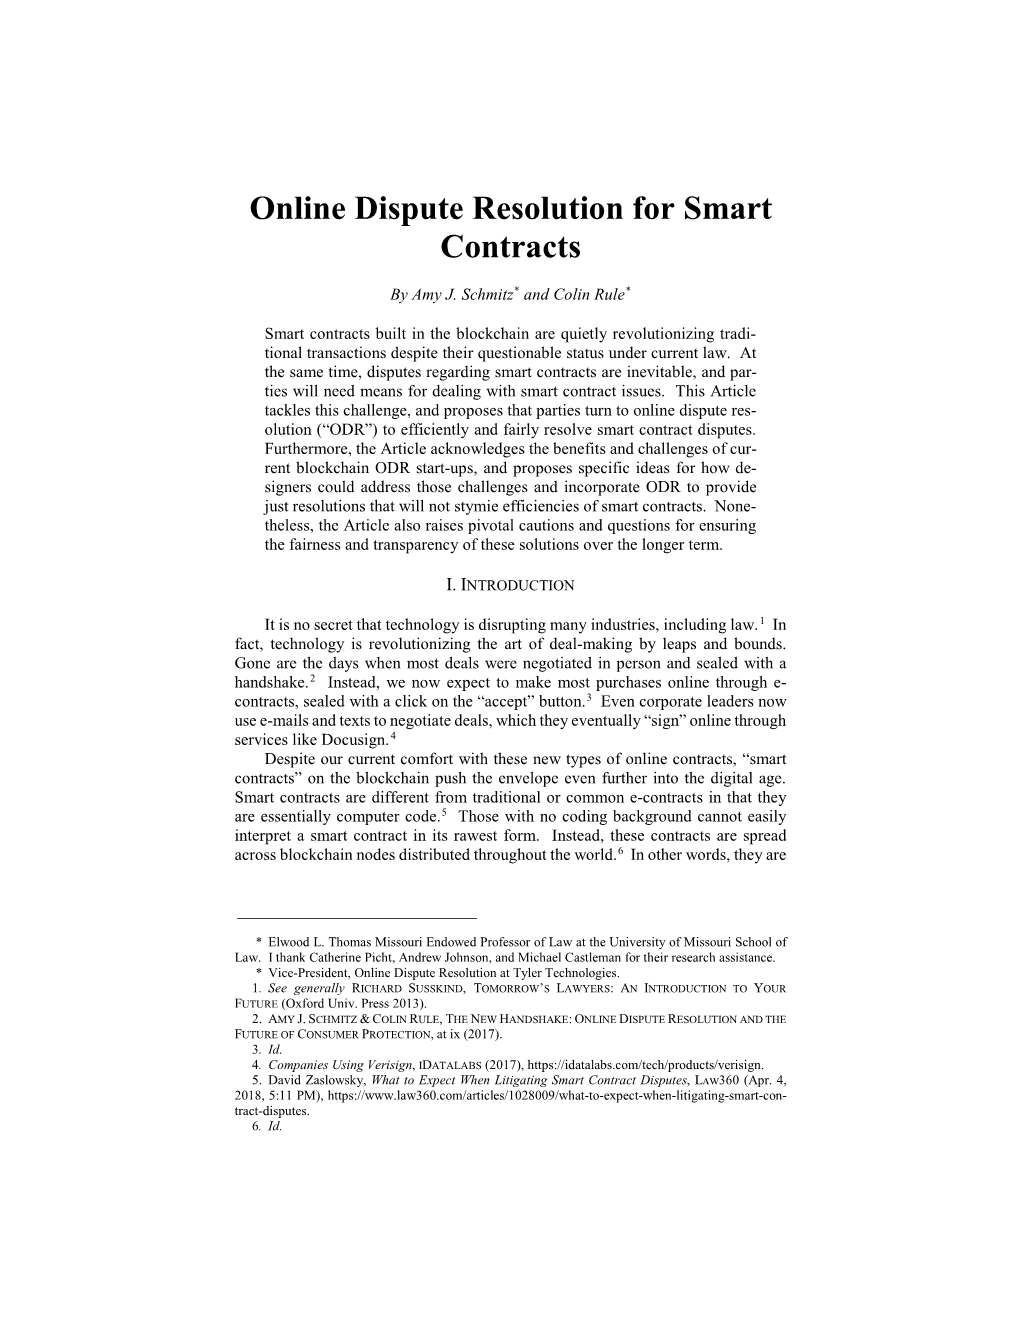 Online Dispute Resolution for Smart Contracts